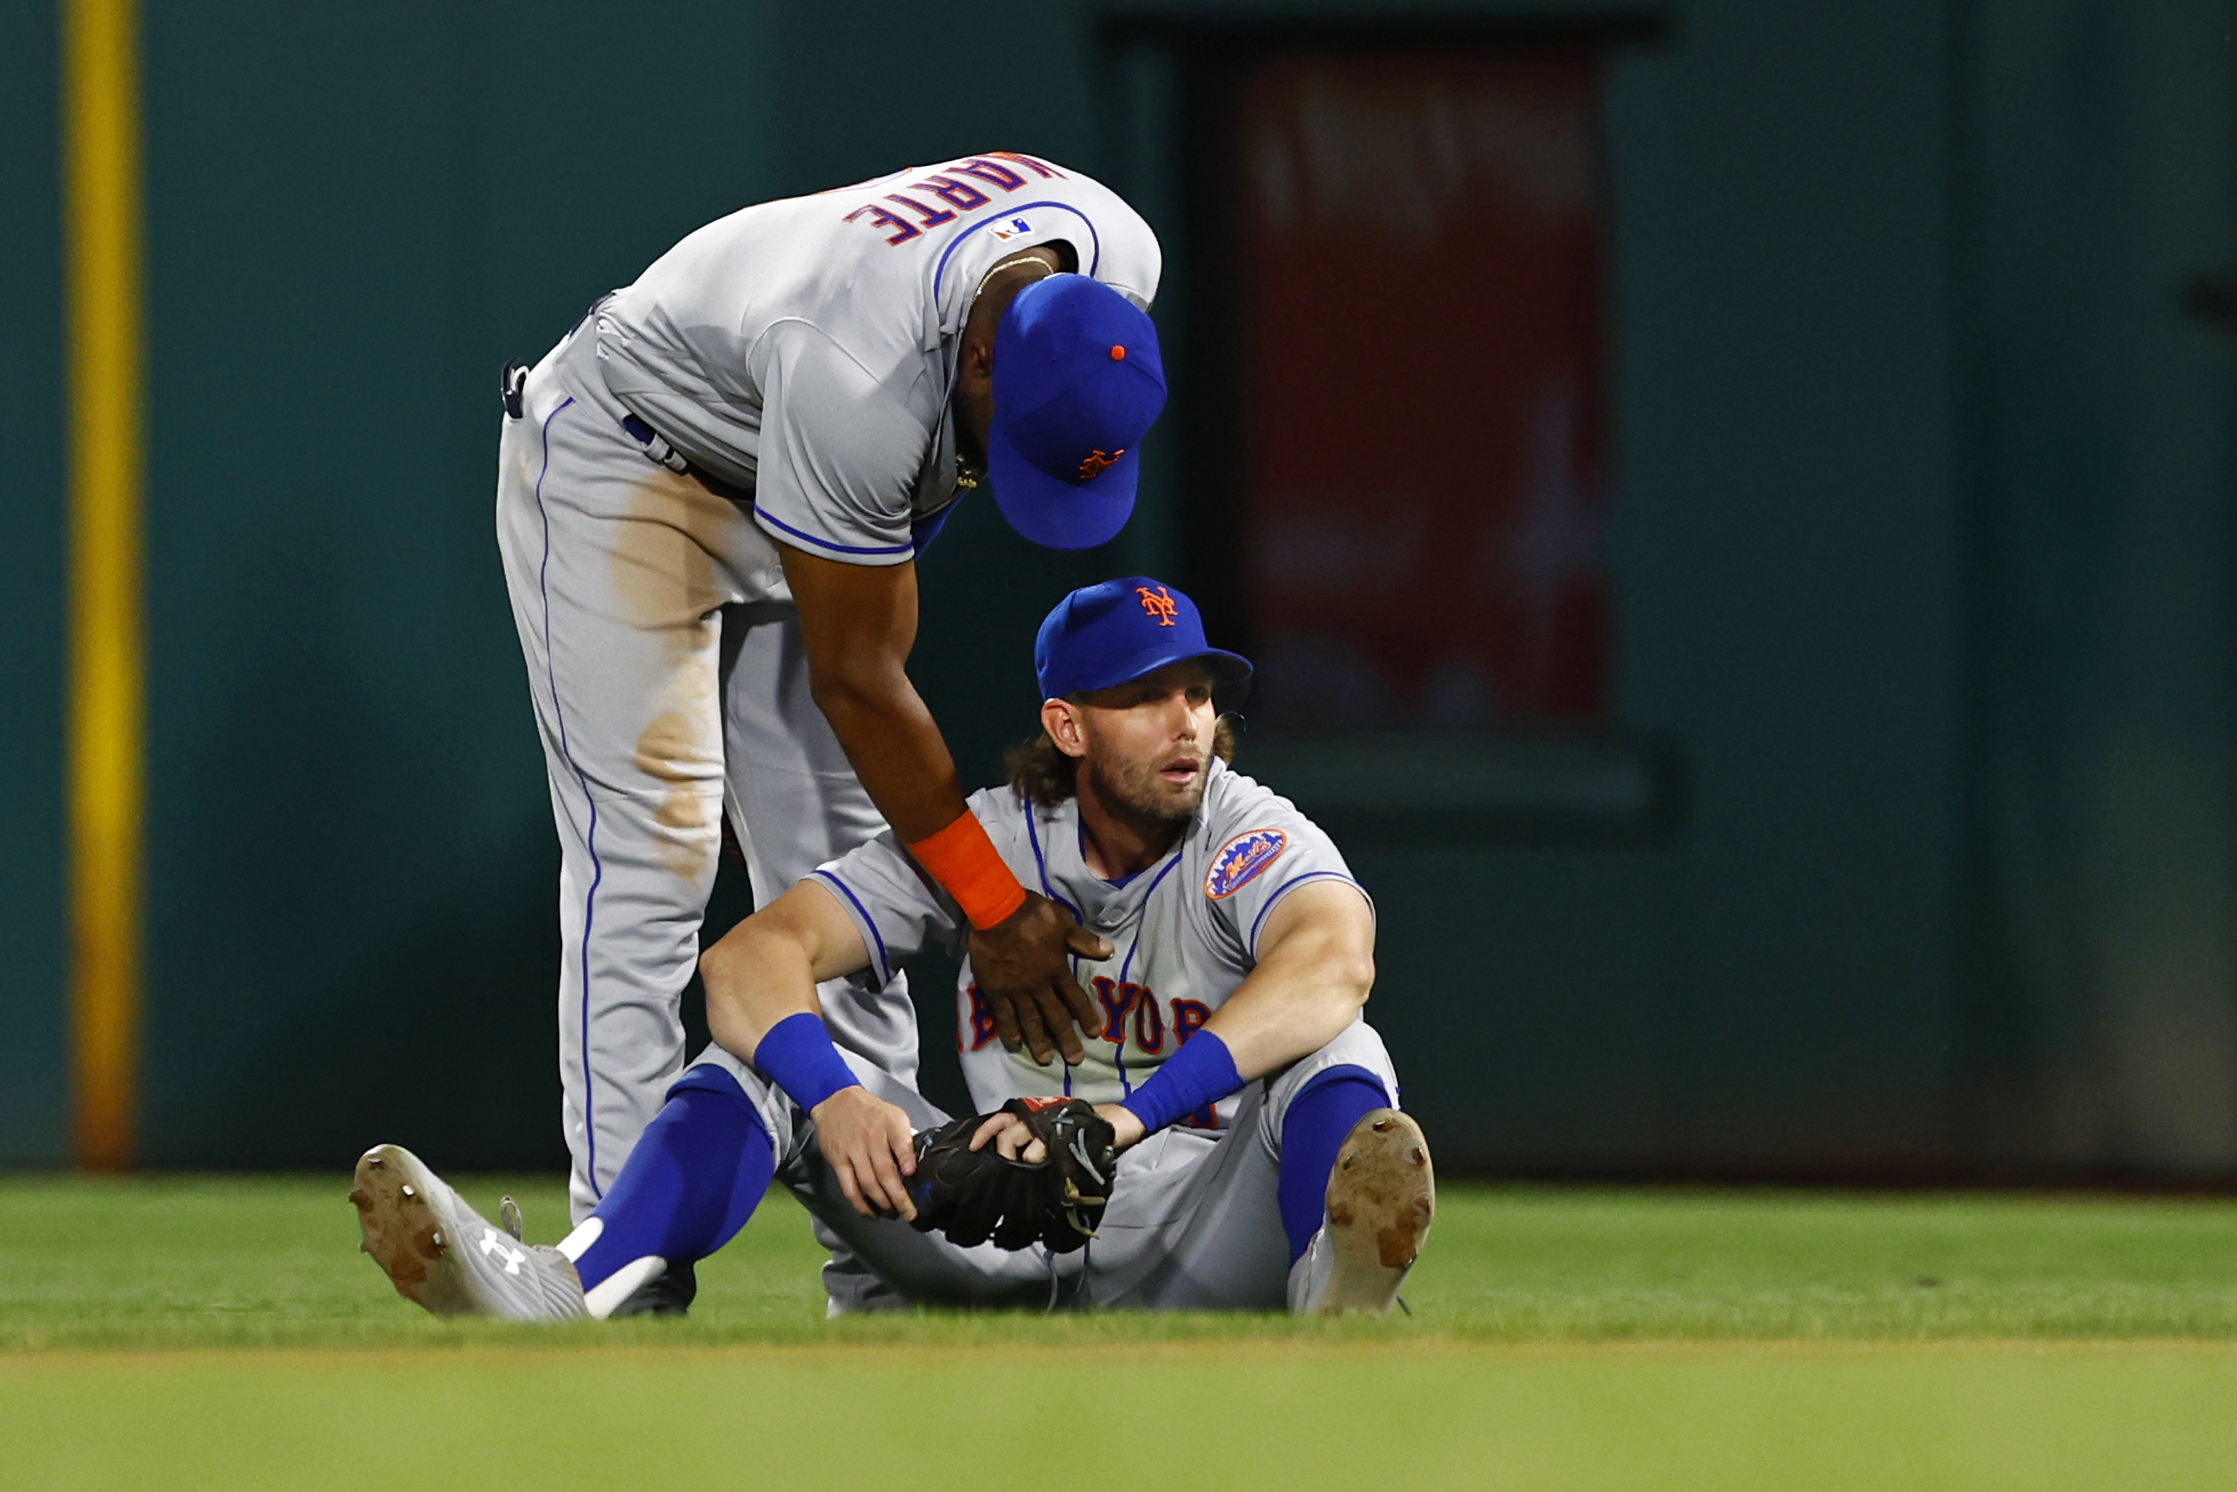 Jeff McNeil: NY Mets lineup flourishing wherever he's slotted